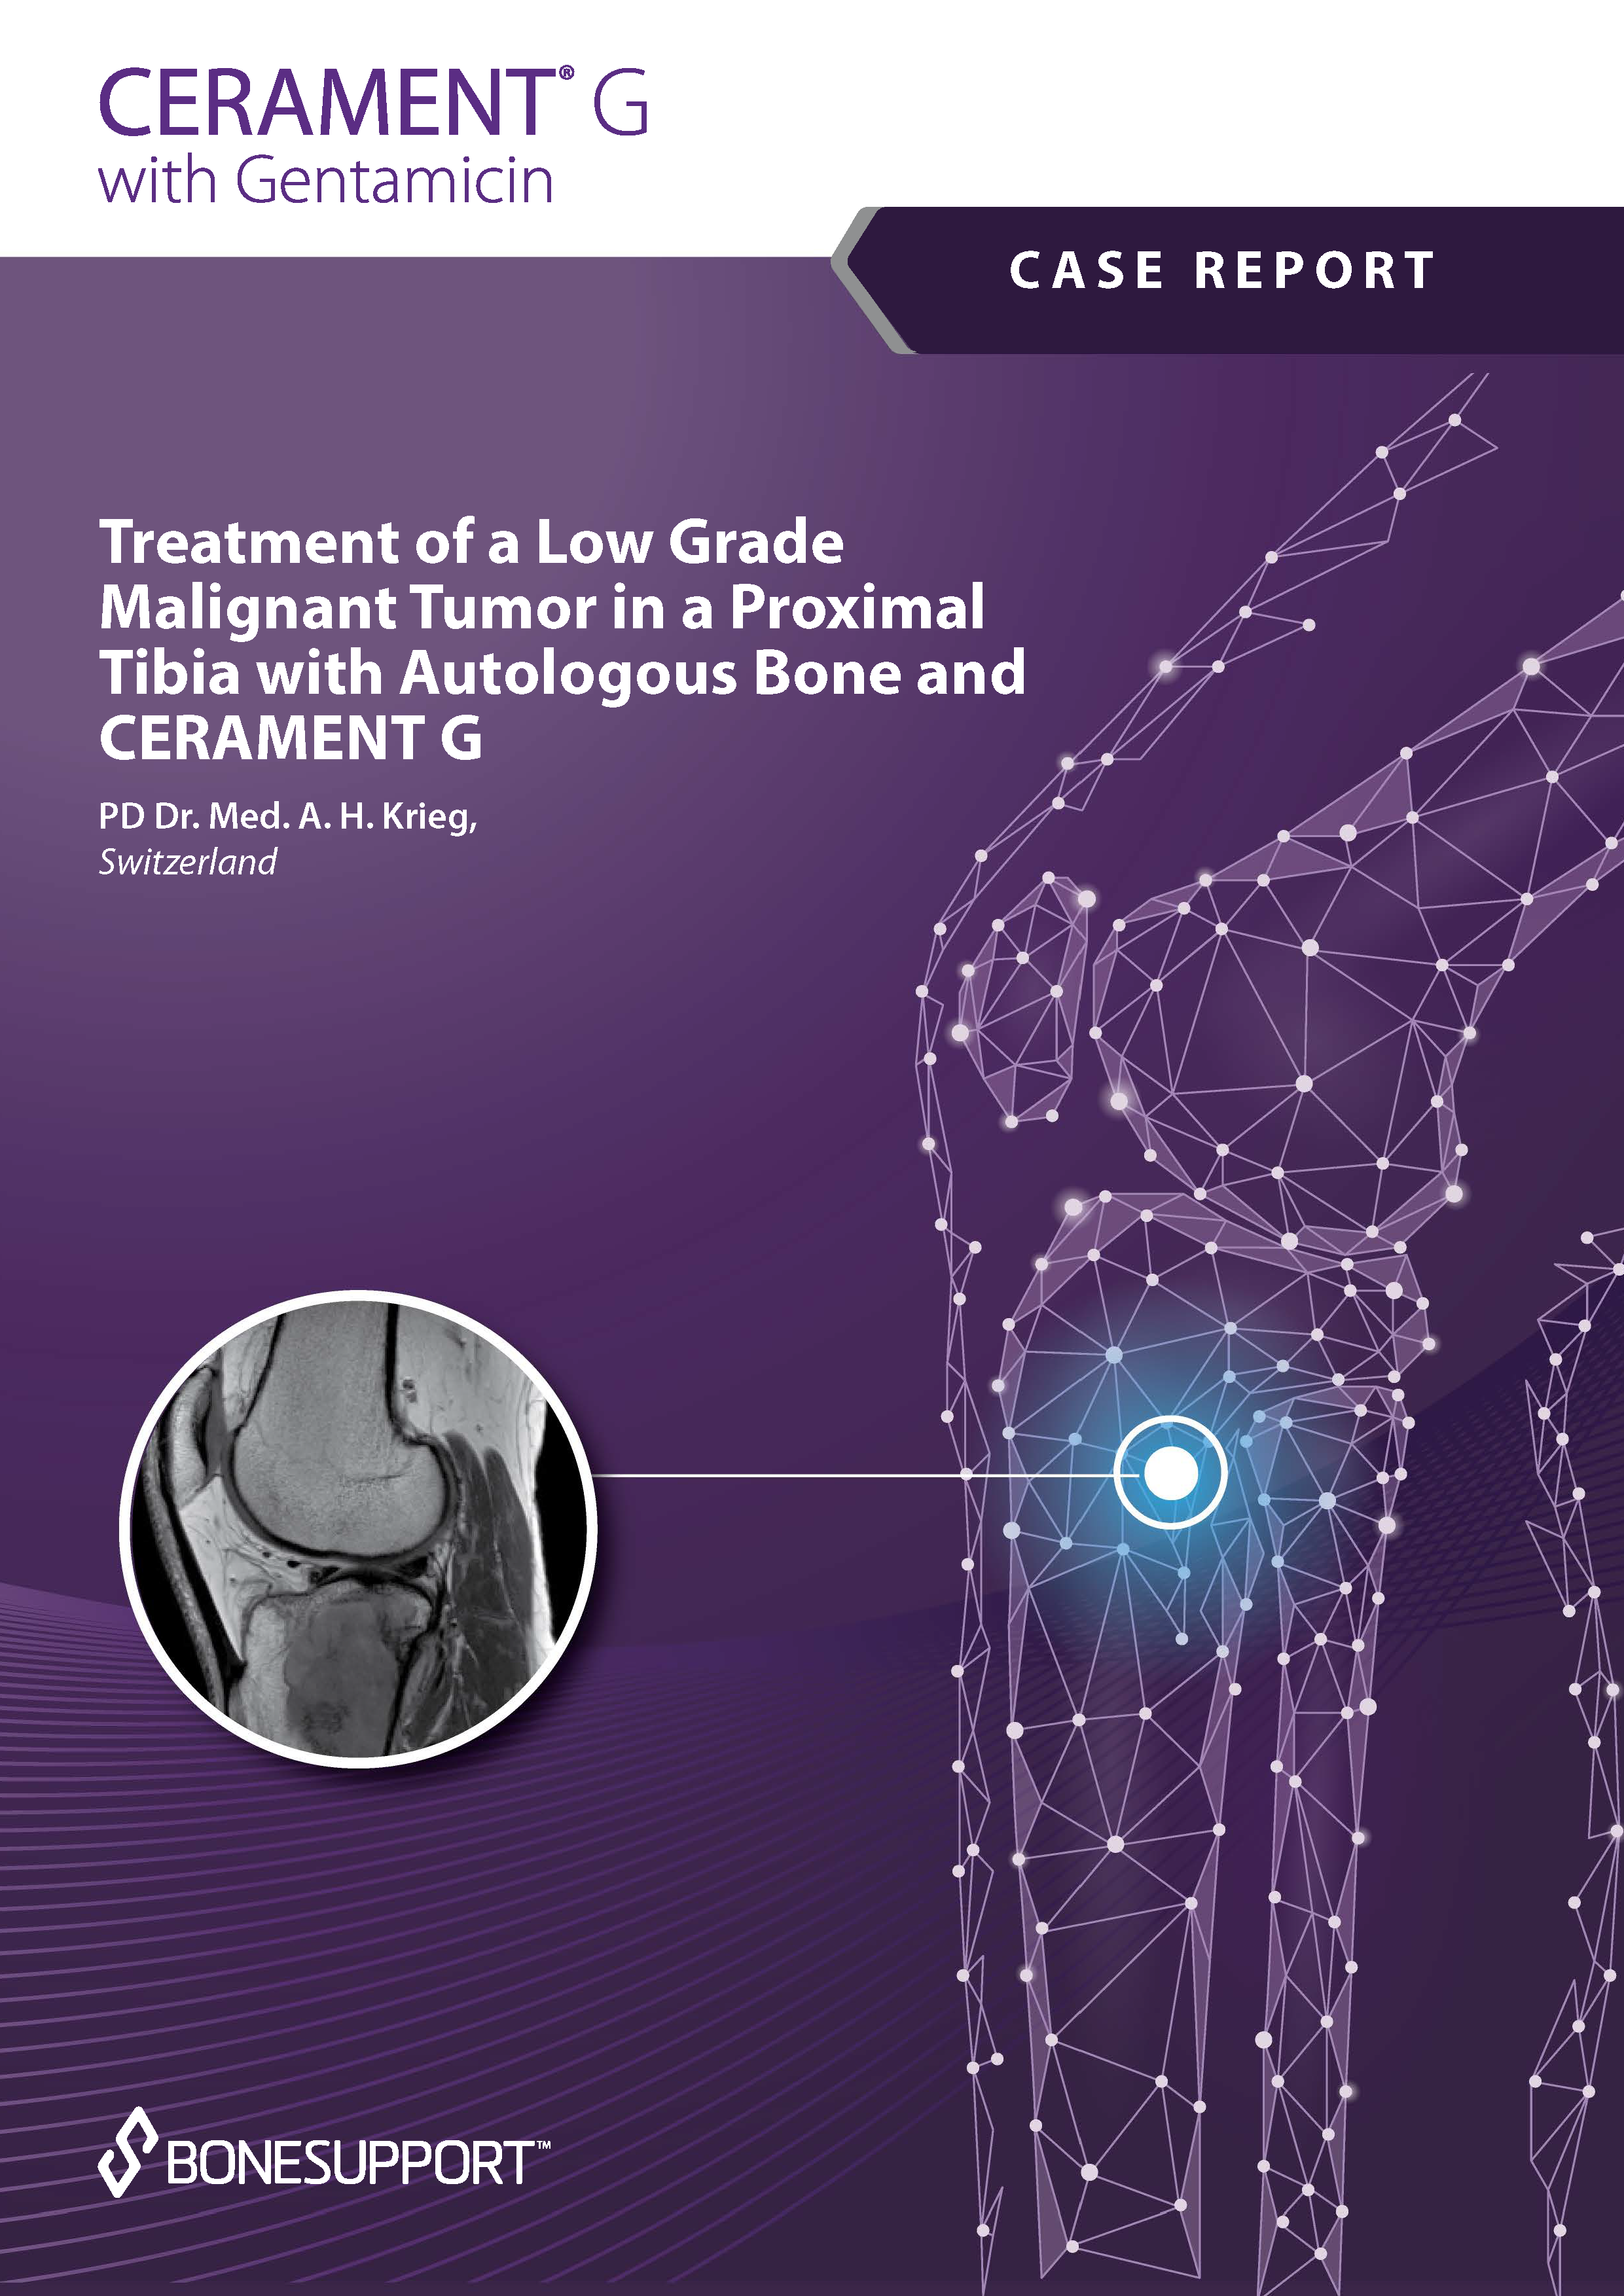 Treatment of a low grade malignant tumor in a proximal tibia with autologous bone and CERAMENT G